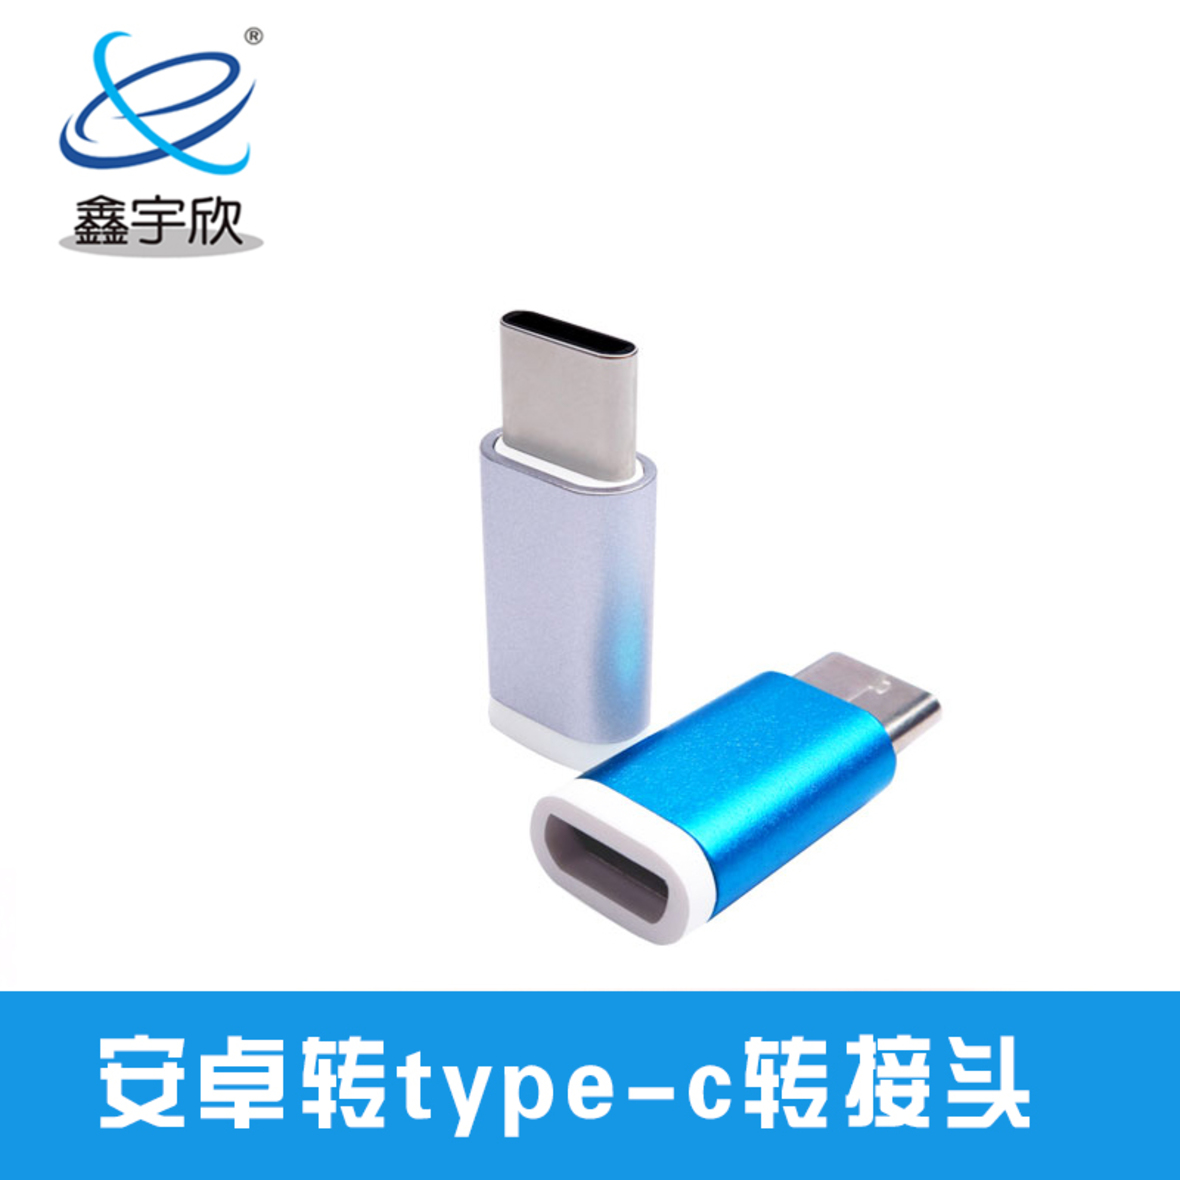  Type-C Male to MicroUSB5P Female Adapter Type-C Adapter Mobile Phone Interface Adapter Metal Shell